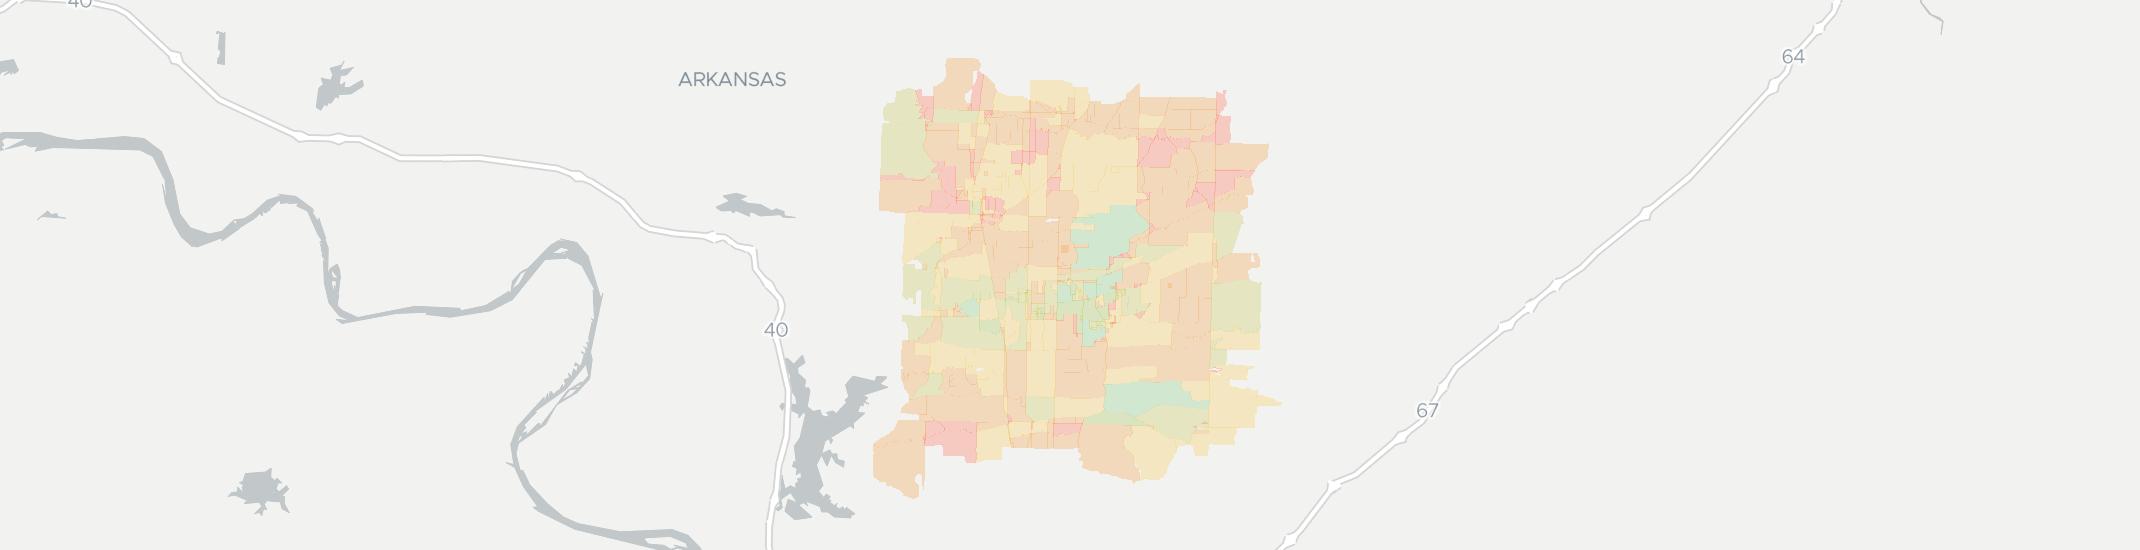 Vilonia Internet Competition Map. Click for interactive map.